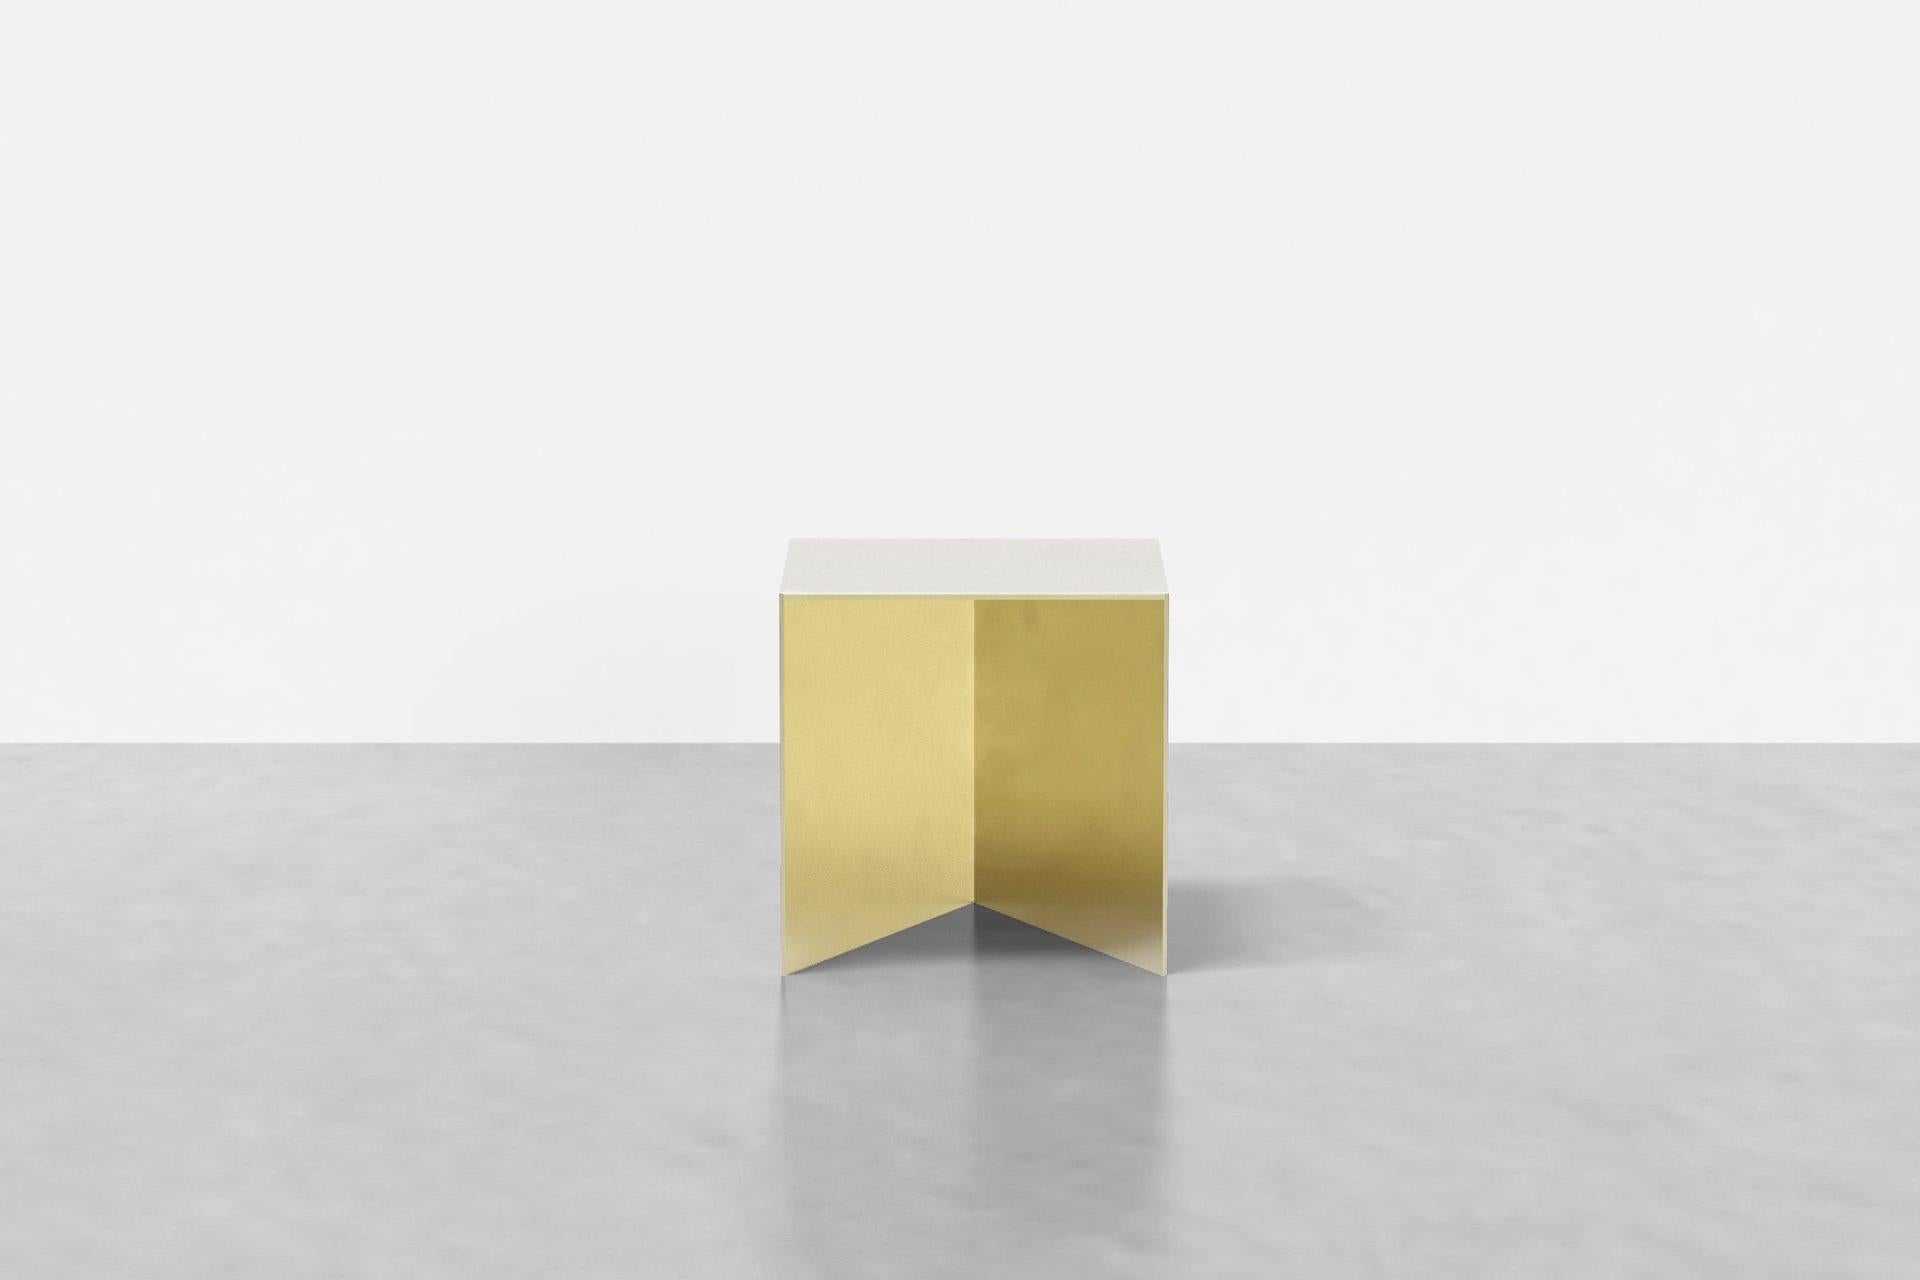 Sleek with simple angles, our Tack end table in brass is an elegant addition next to your lounge chair or sofa. Crafted from solid brass and seamlessly welded together, the Tack is handmade to order in our studio.

Available in solid brass and